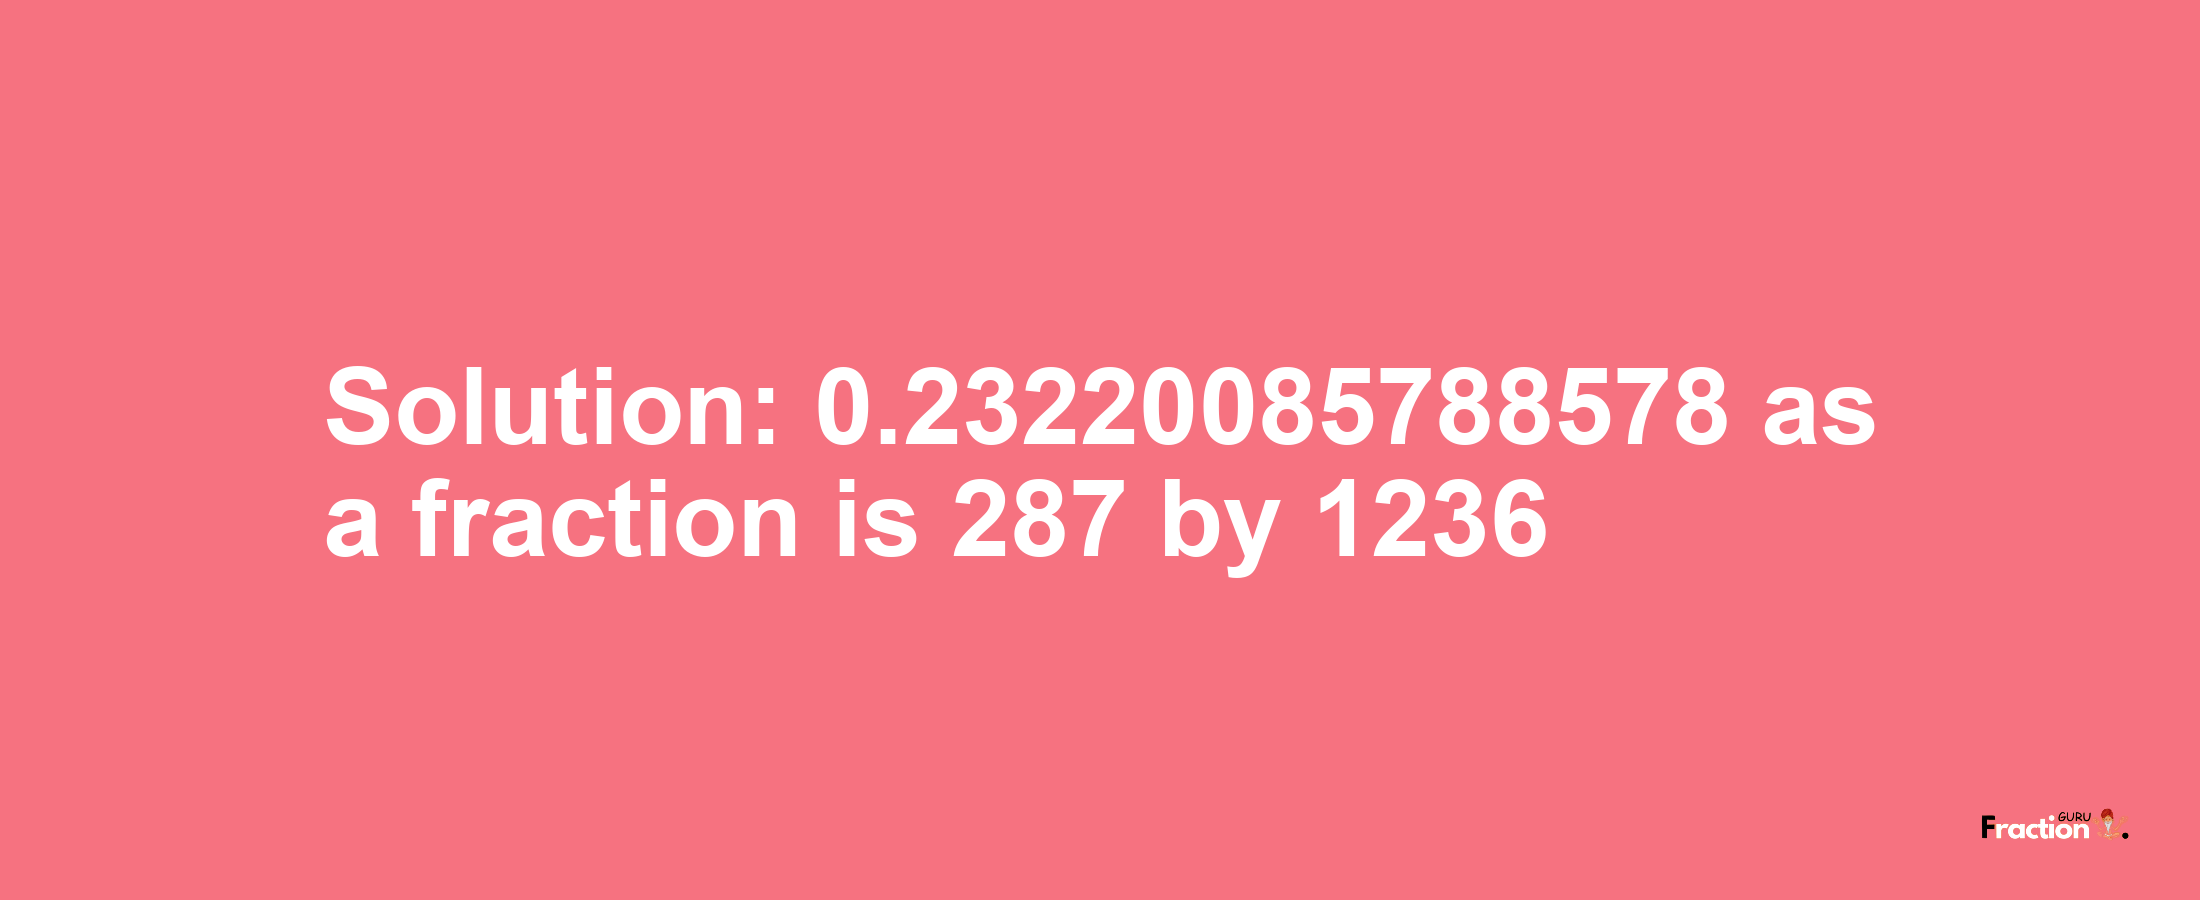 Solution:0.23220085788578 as a fraction is 287/1236